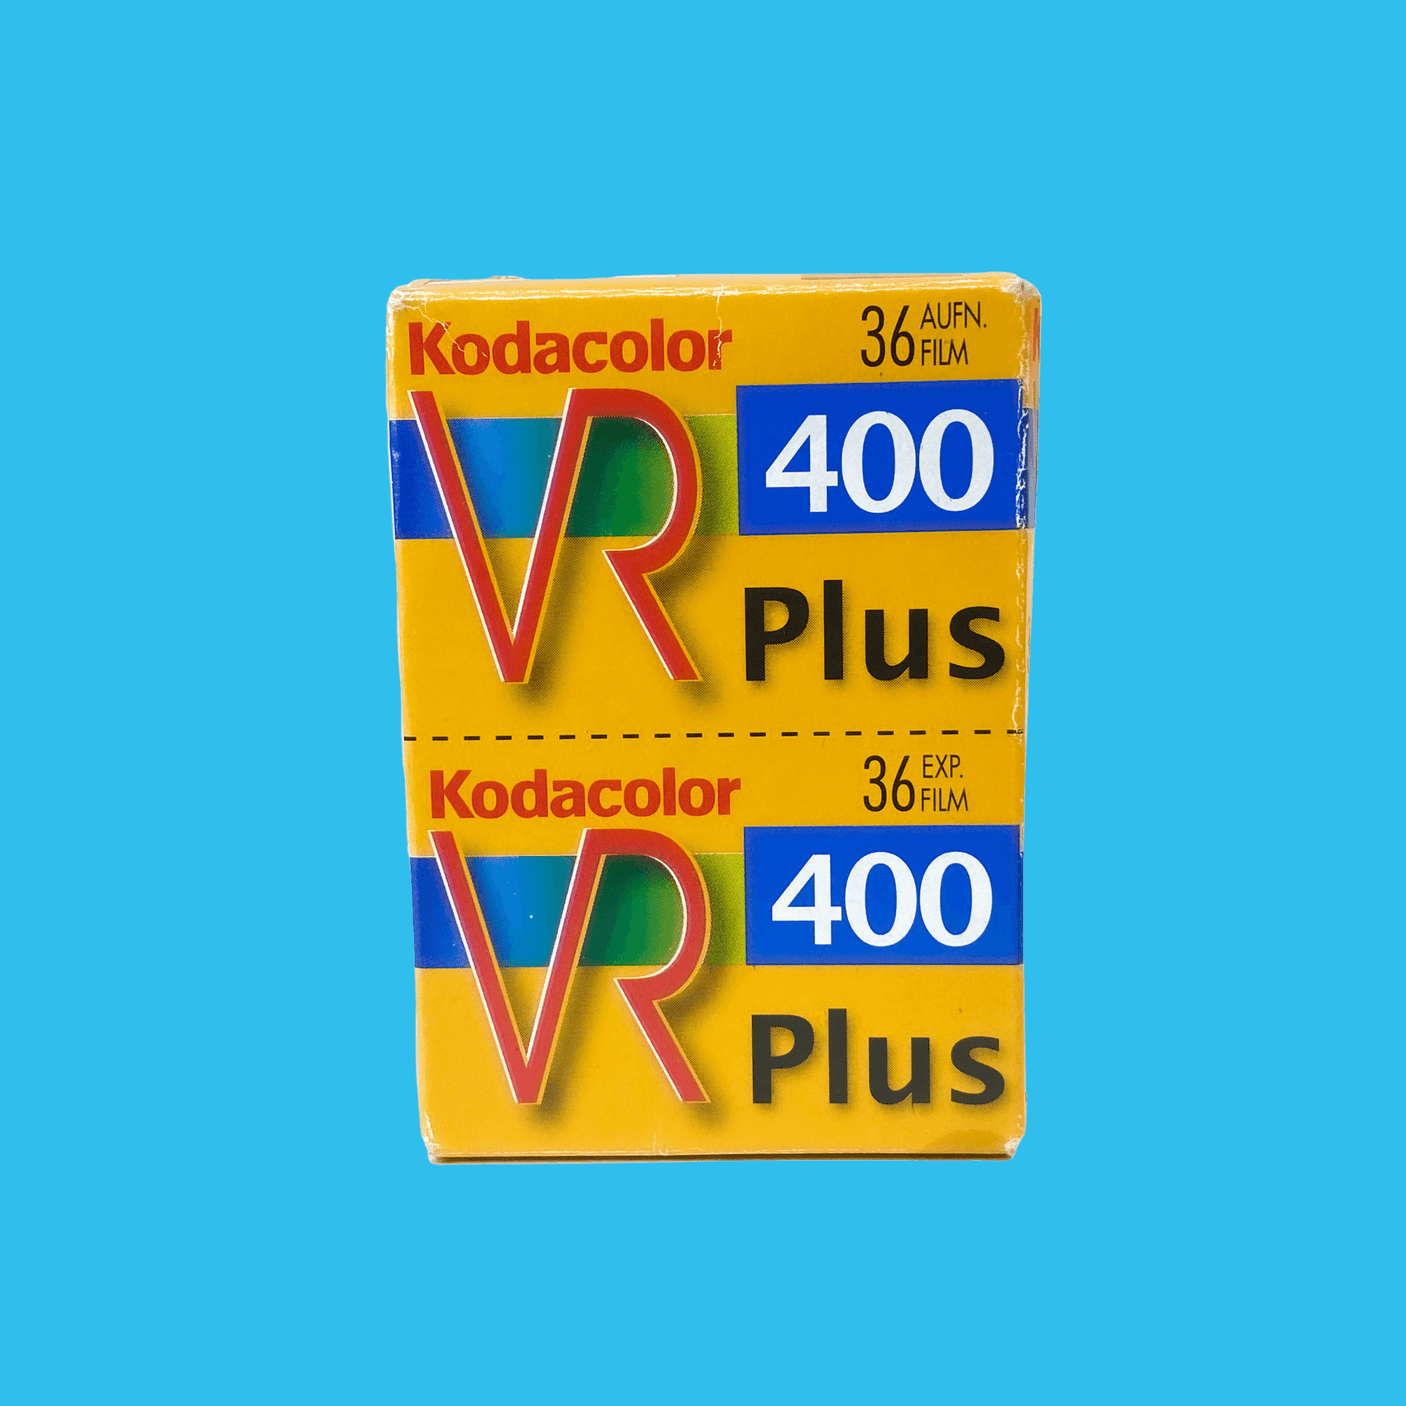 Kodacolor VR 400 Plus 36 Exp 35mm Film Double Pack EXPIRED